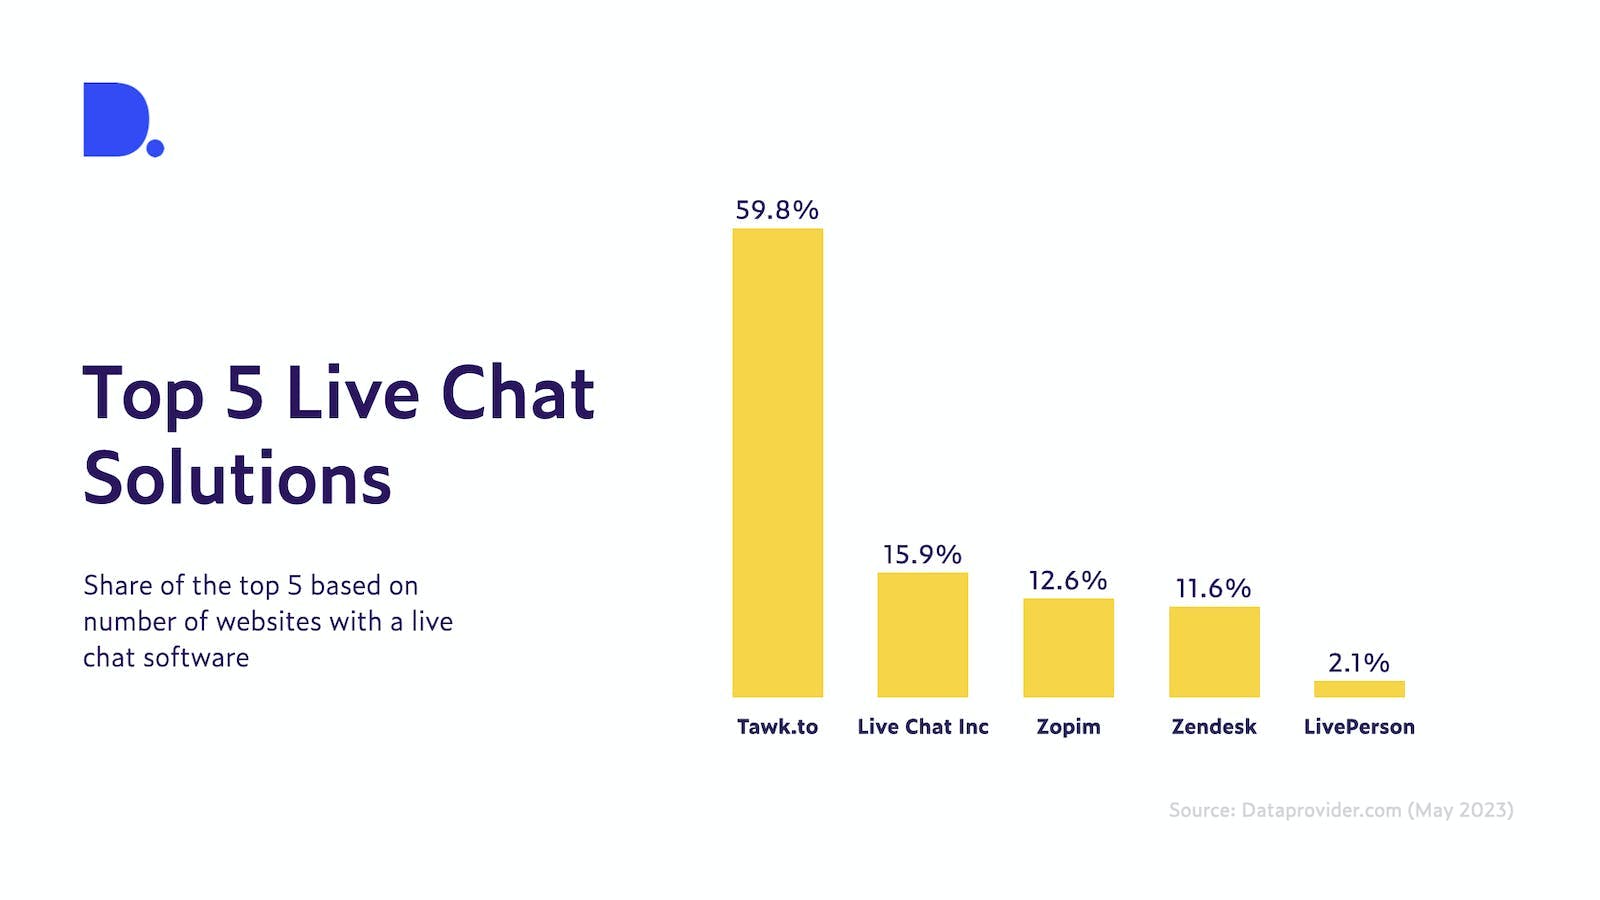 Top 5 Live Chat Solutions (Source: Dataprovider.com, May 2023)